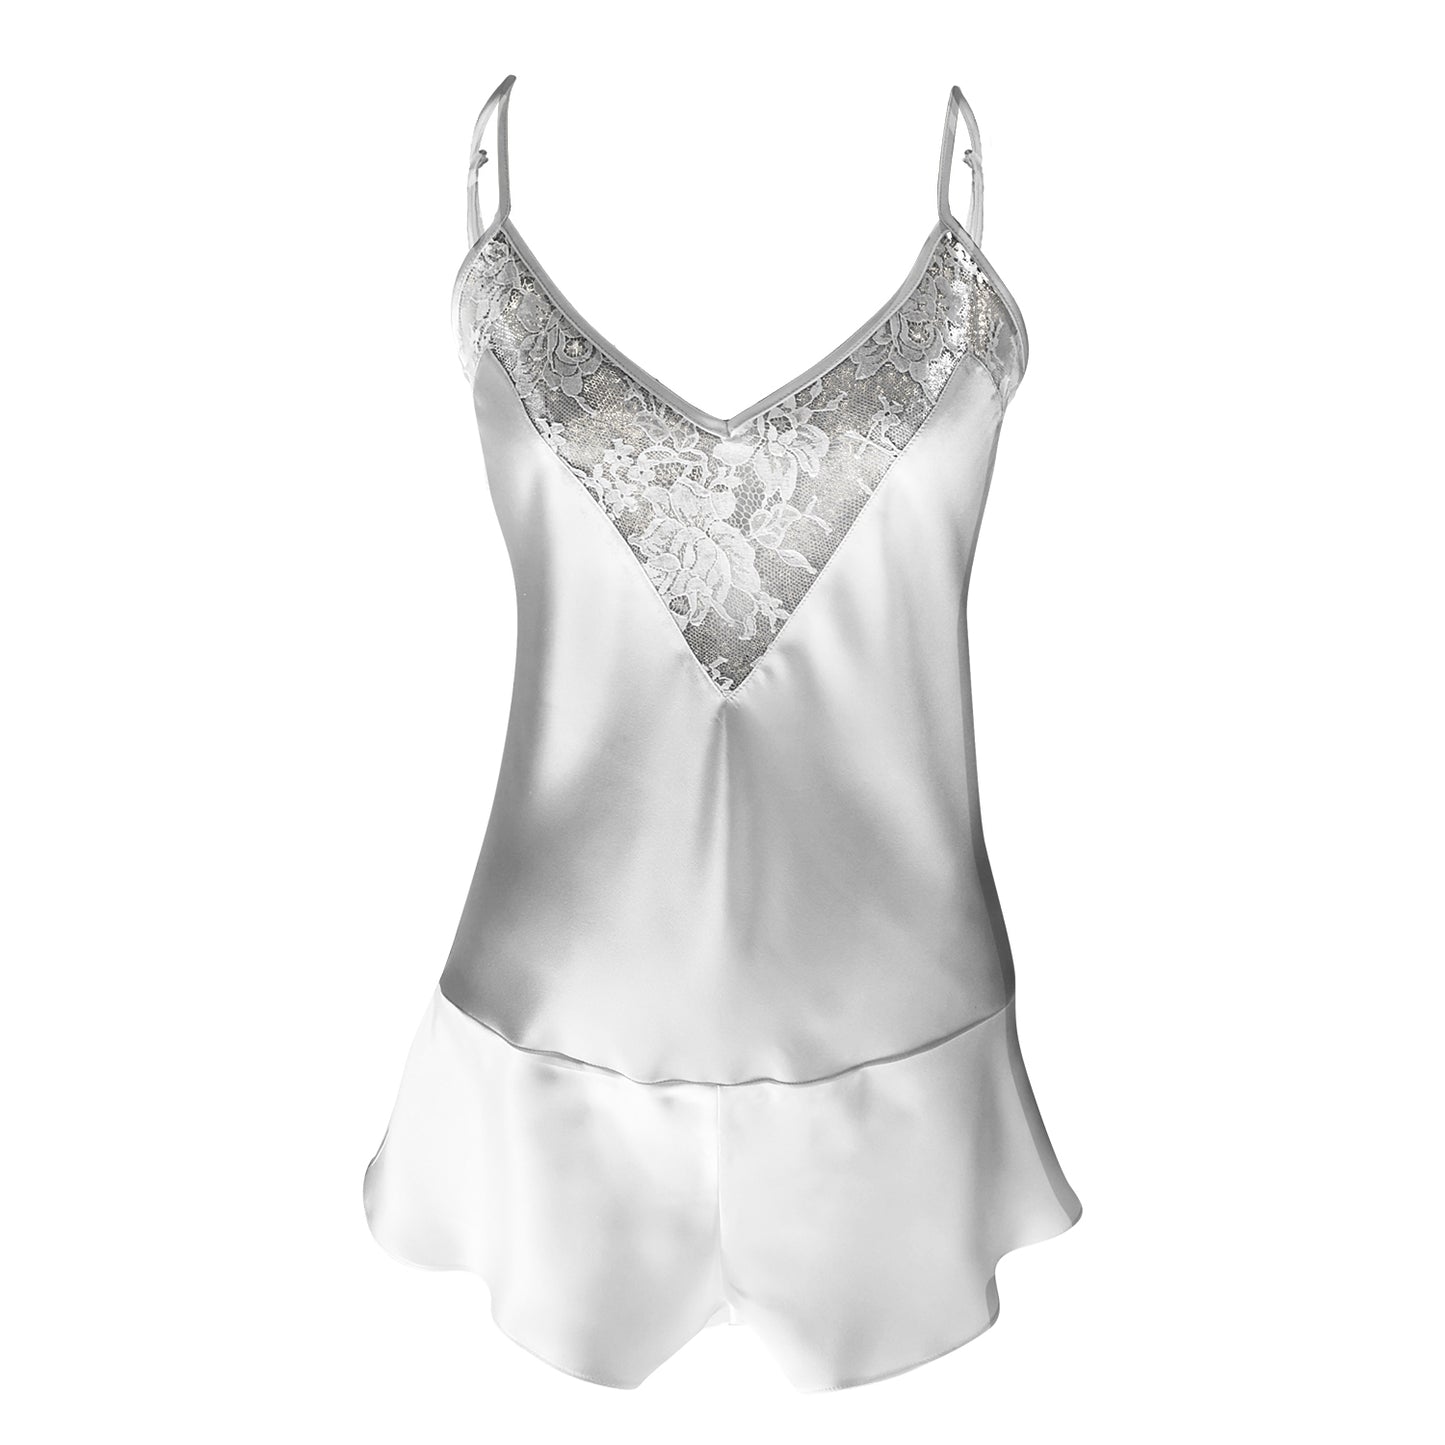 Ivory silk playsuit with French lace